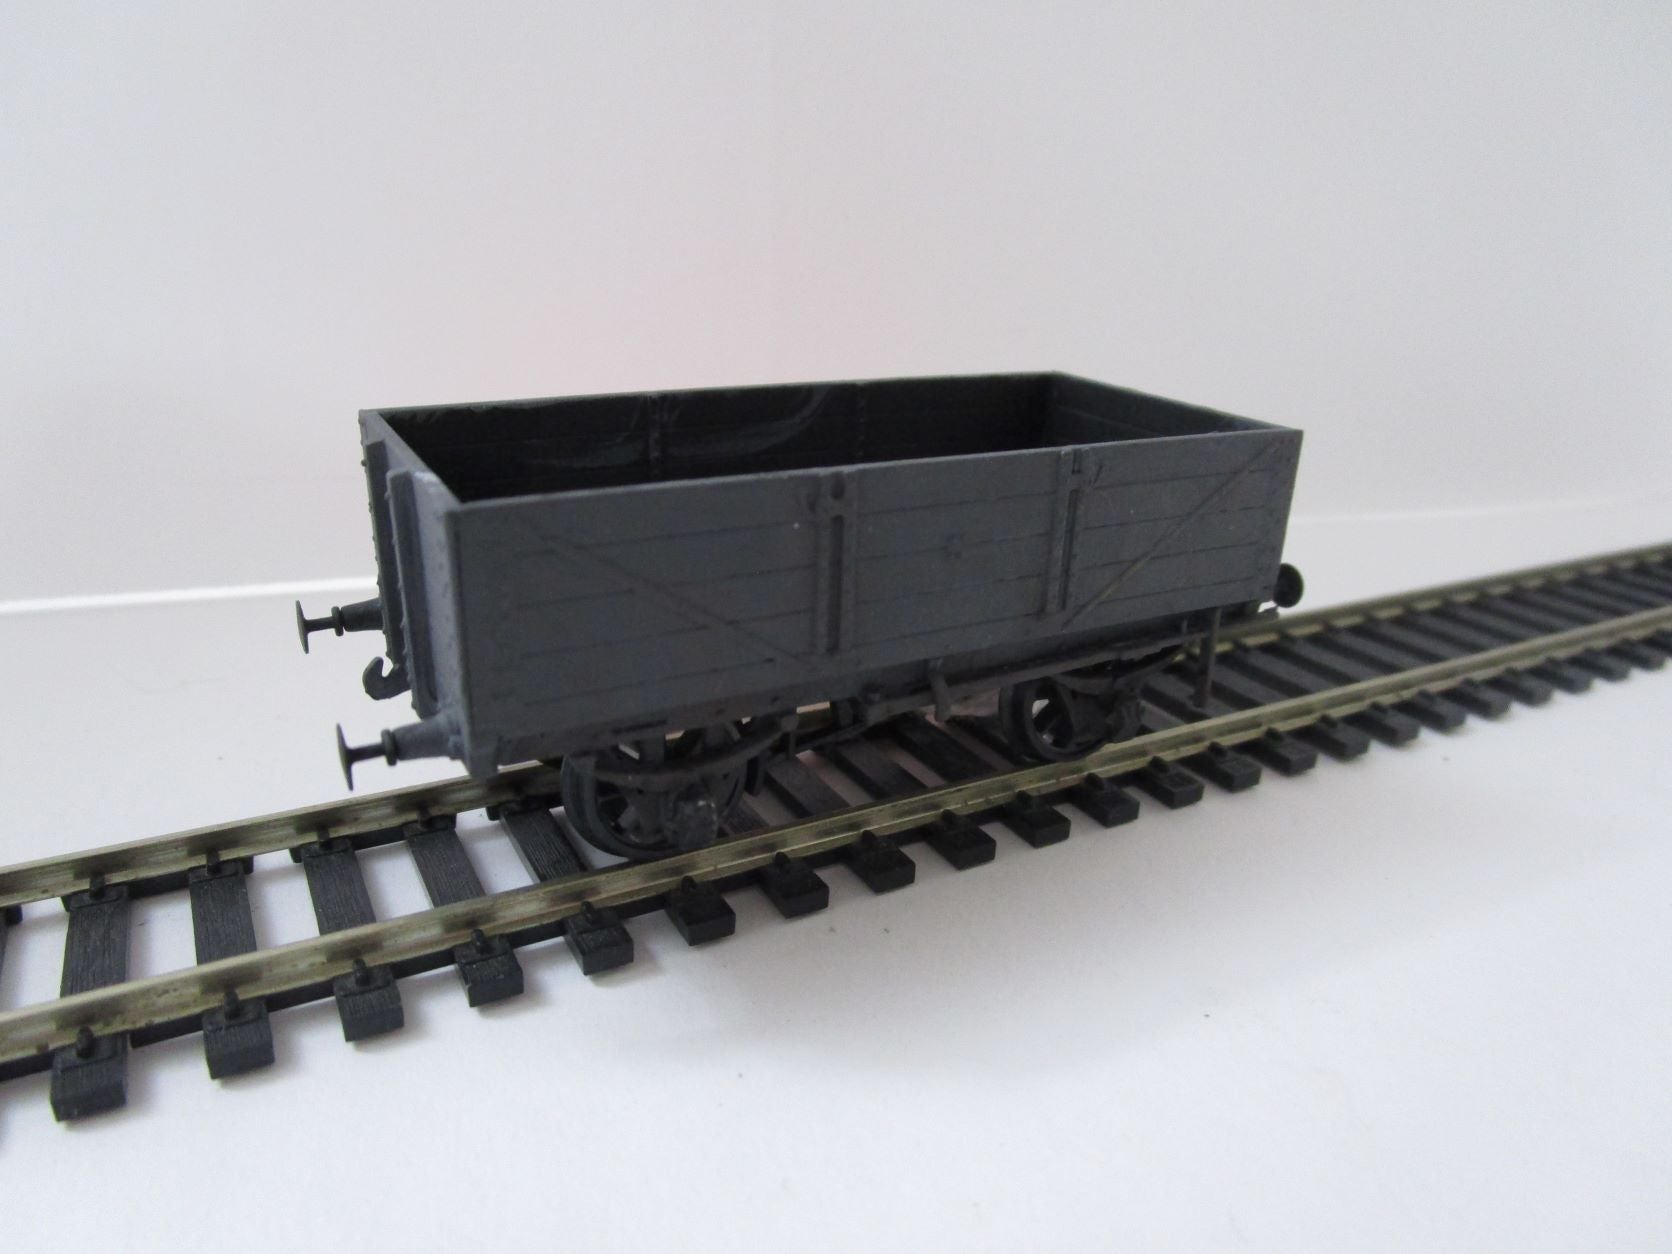 BMTW042 LMS 4 plank wagon - made from a RATIO kit - unboxed